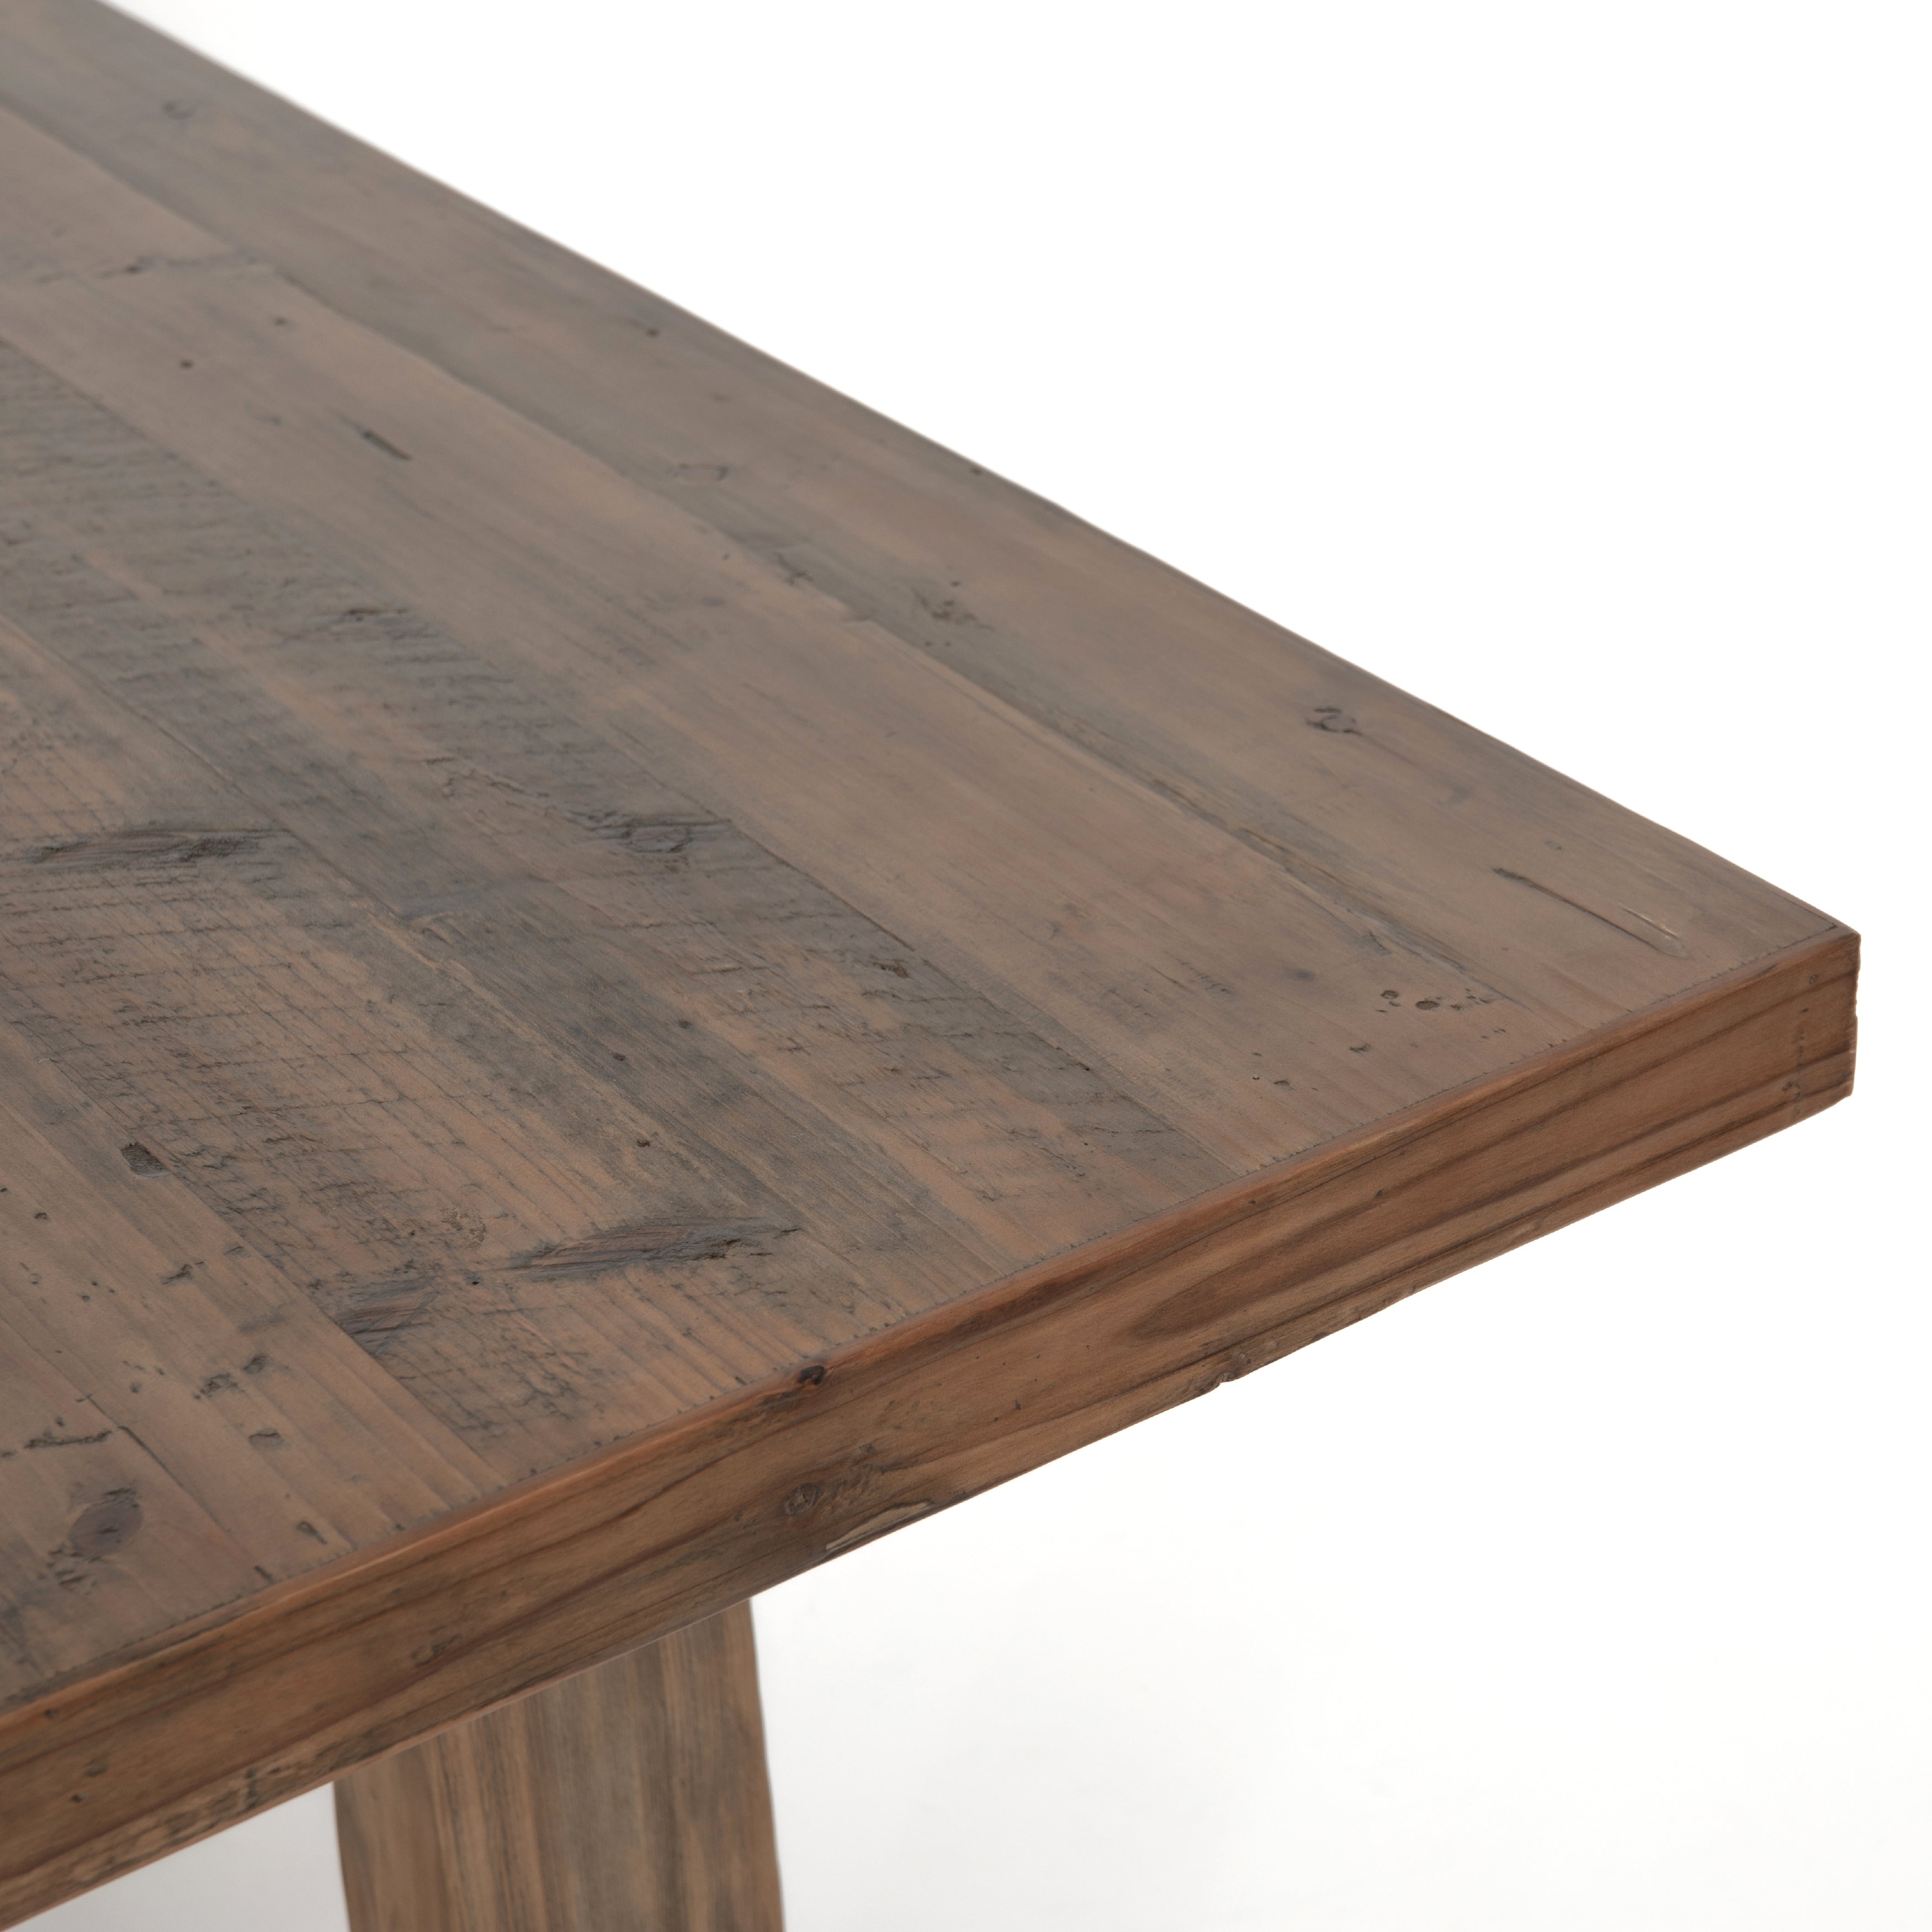 Bring a traditional sense to the table with this Otto Dining Table - 110". Finished in a warm honey hue, a trestle-style base of reclaimed pine supports a rectangular top of pine, waxed and bleached for a rustic look with natural depth.